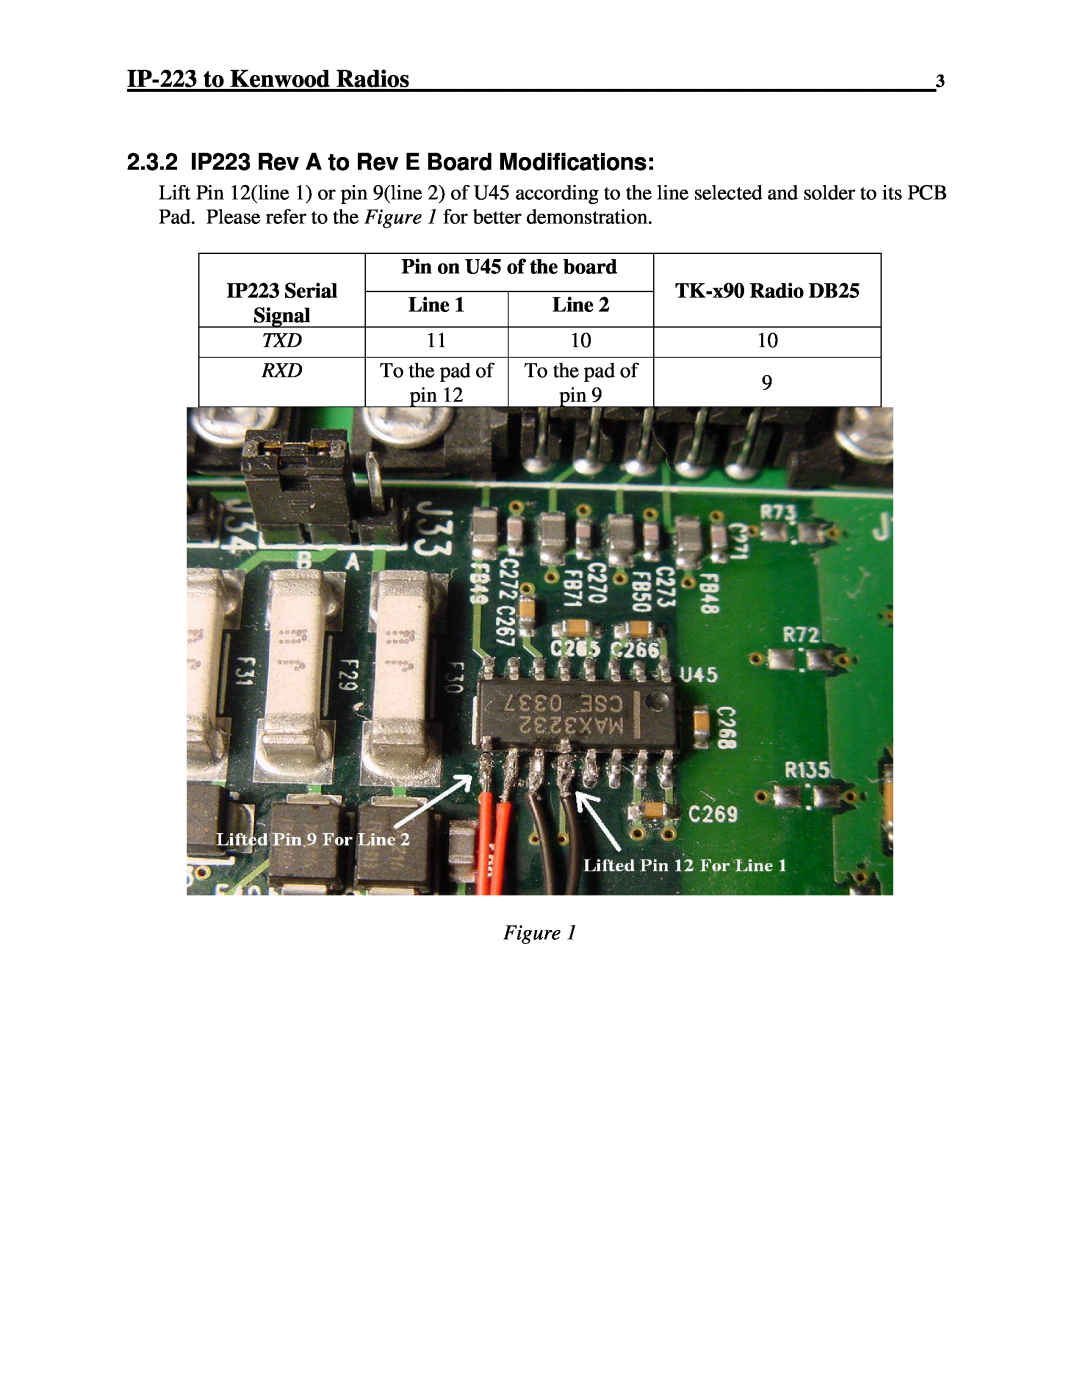 Telex 80 manual 2.3.2 IP223 Rev A to Rev E Board Modifications, IP-223to Kenwood Radios 